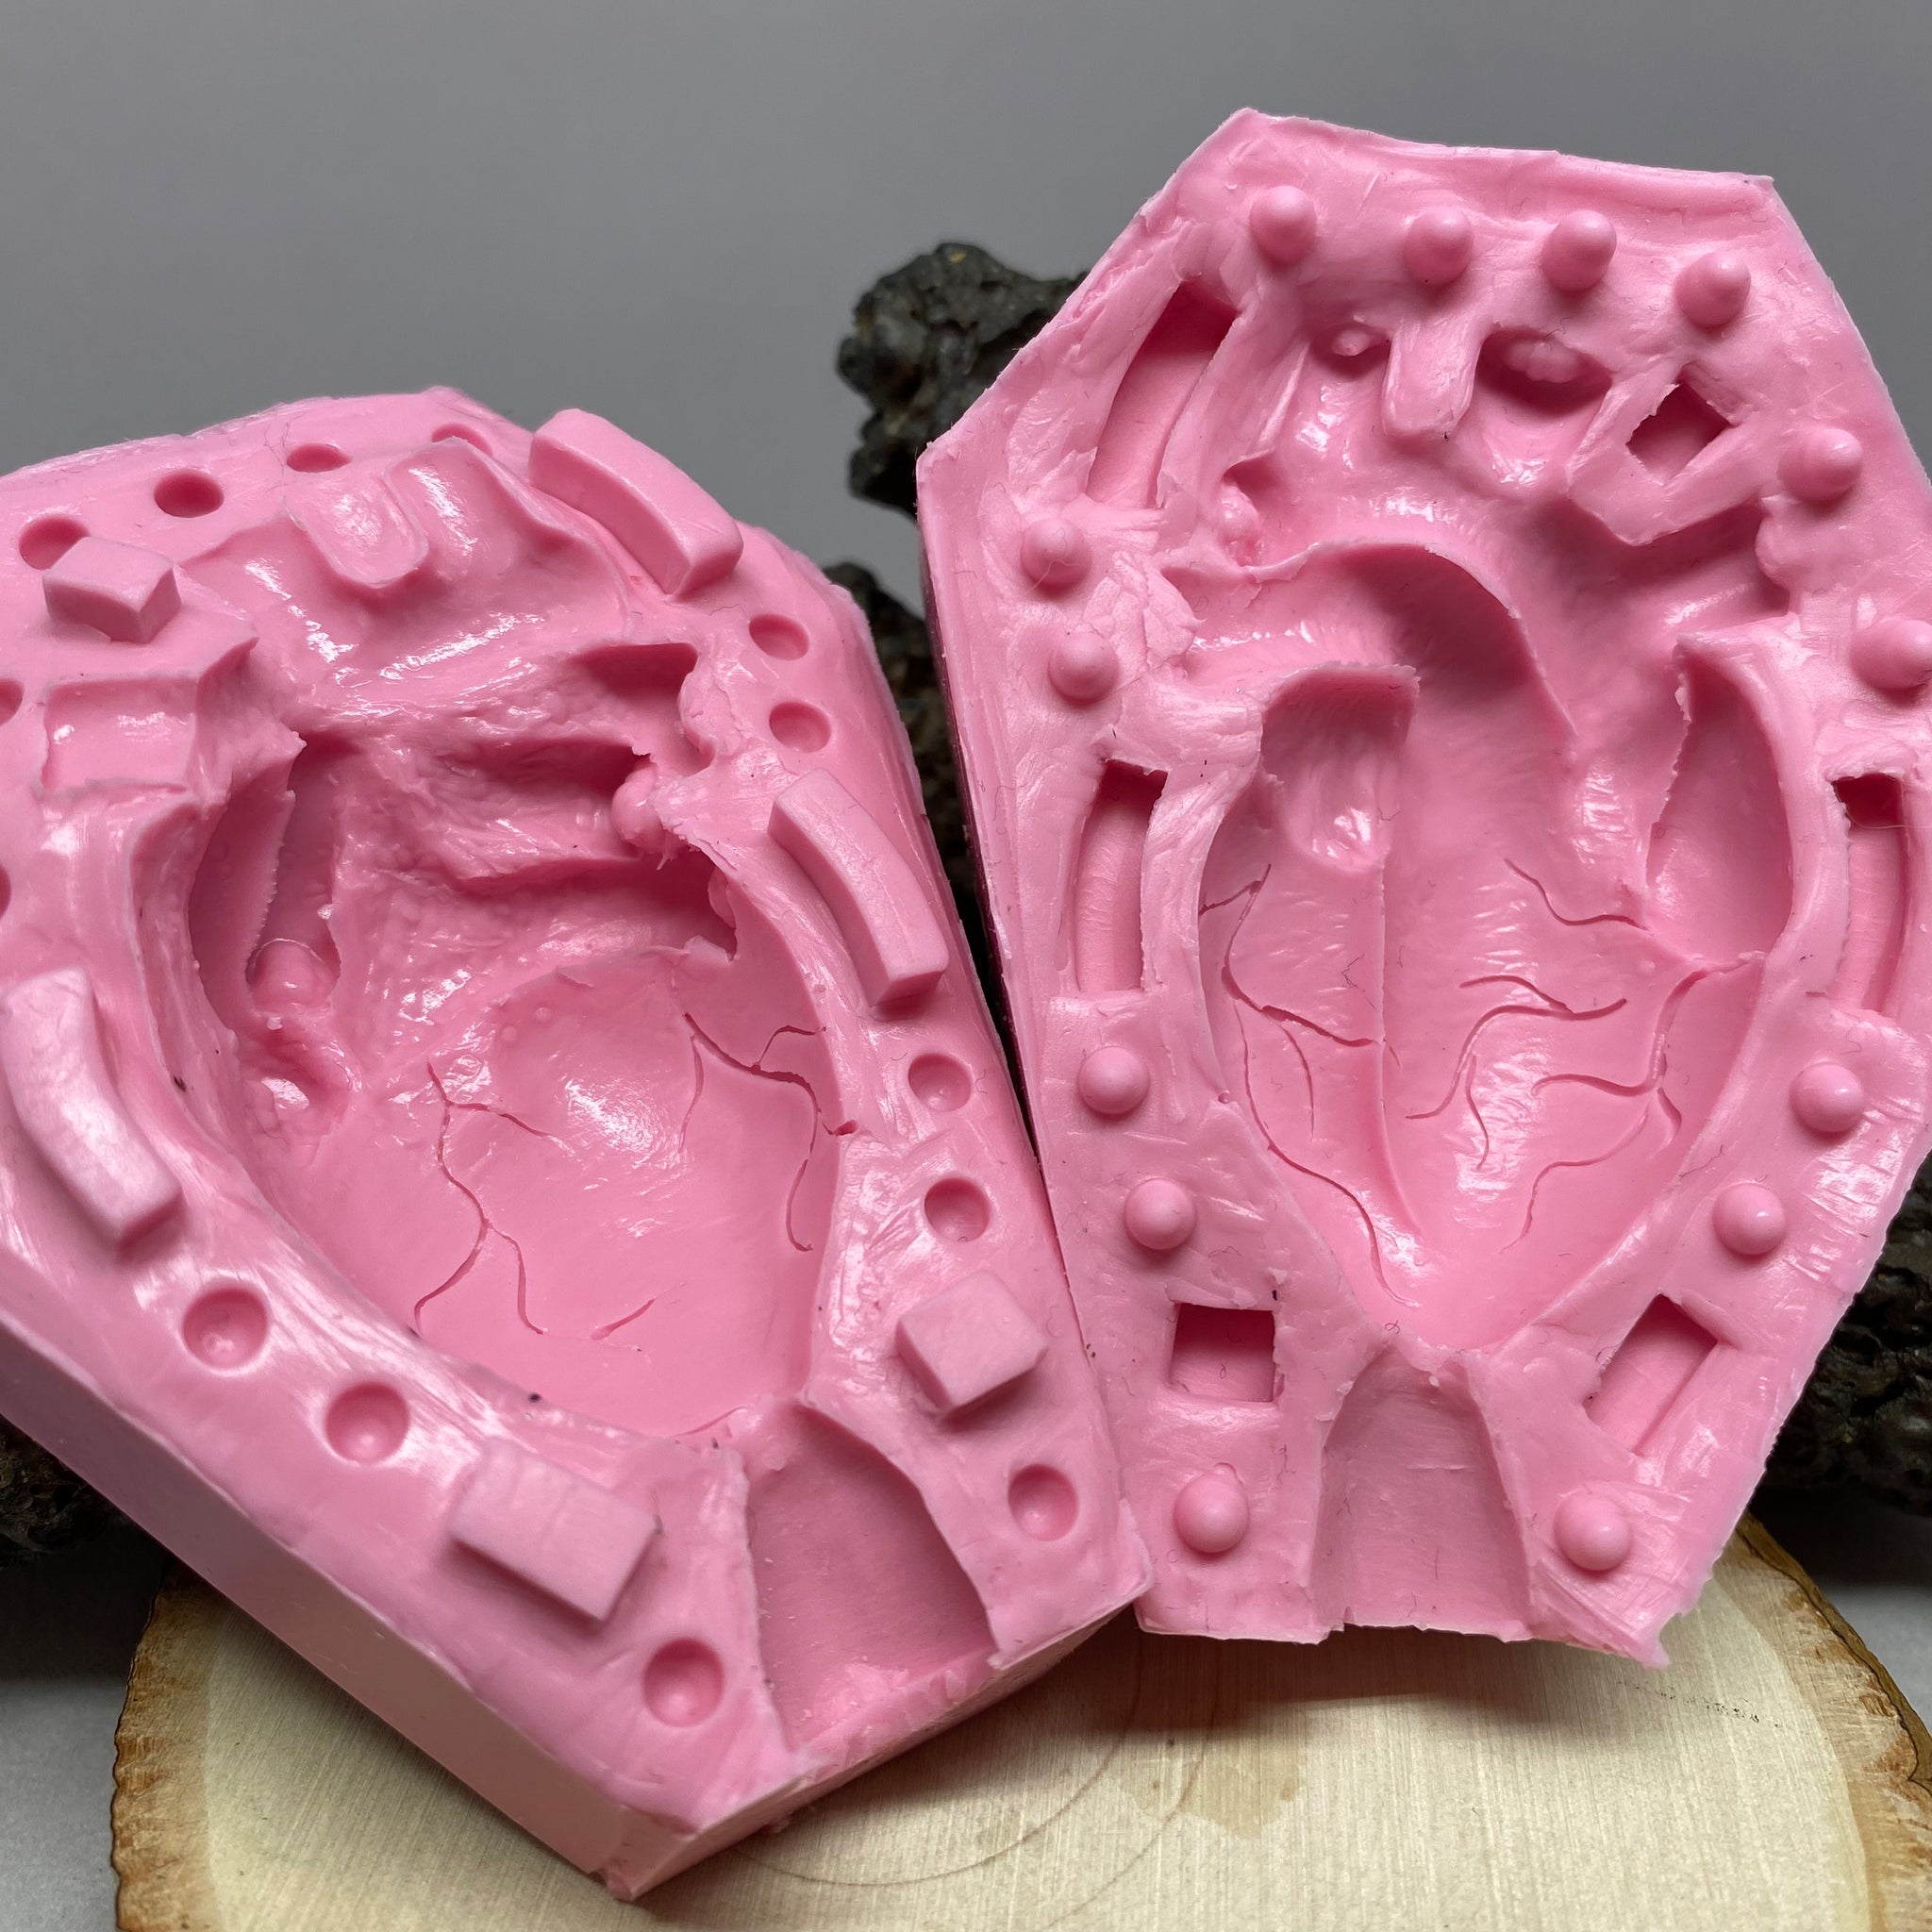 2 Broken Heart Silicone Mold – The Crafts and Glitter Shop